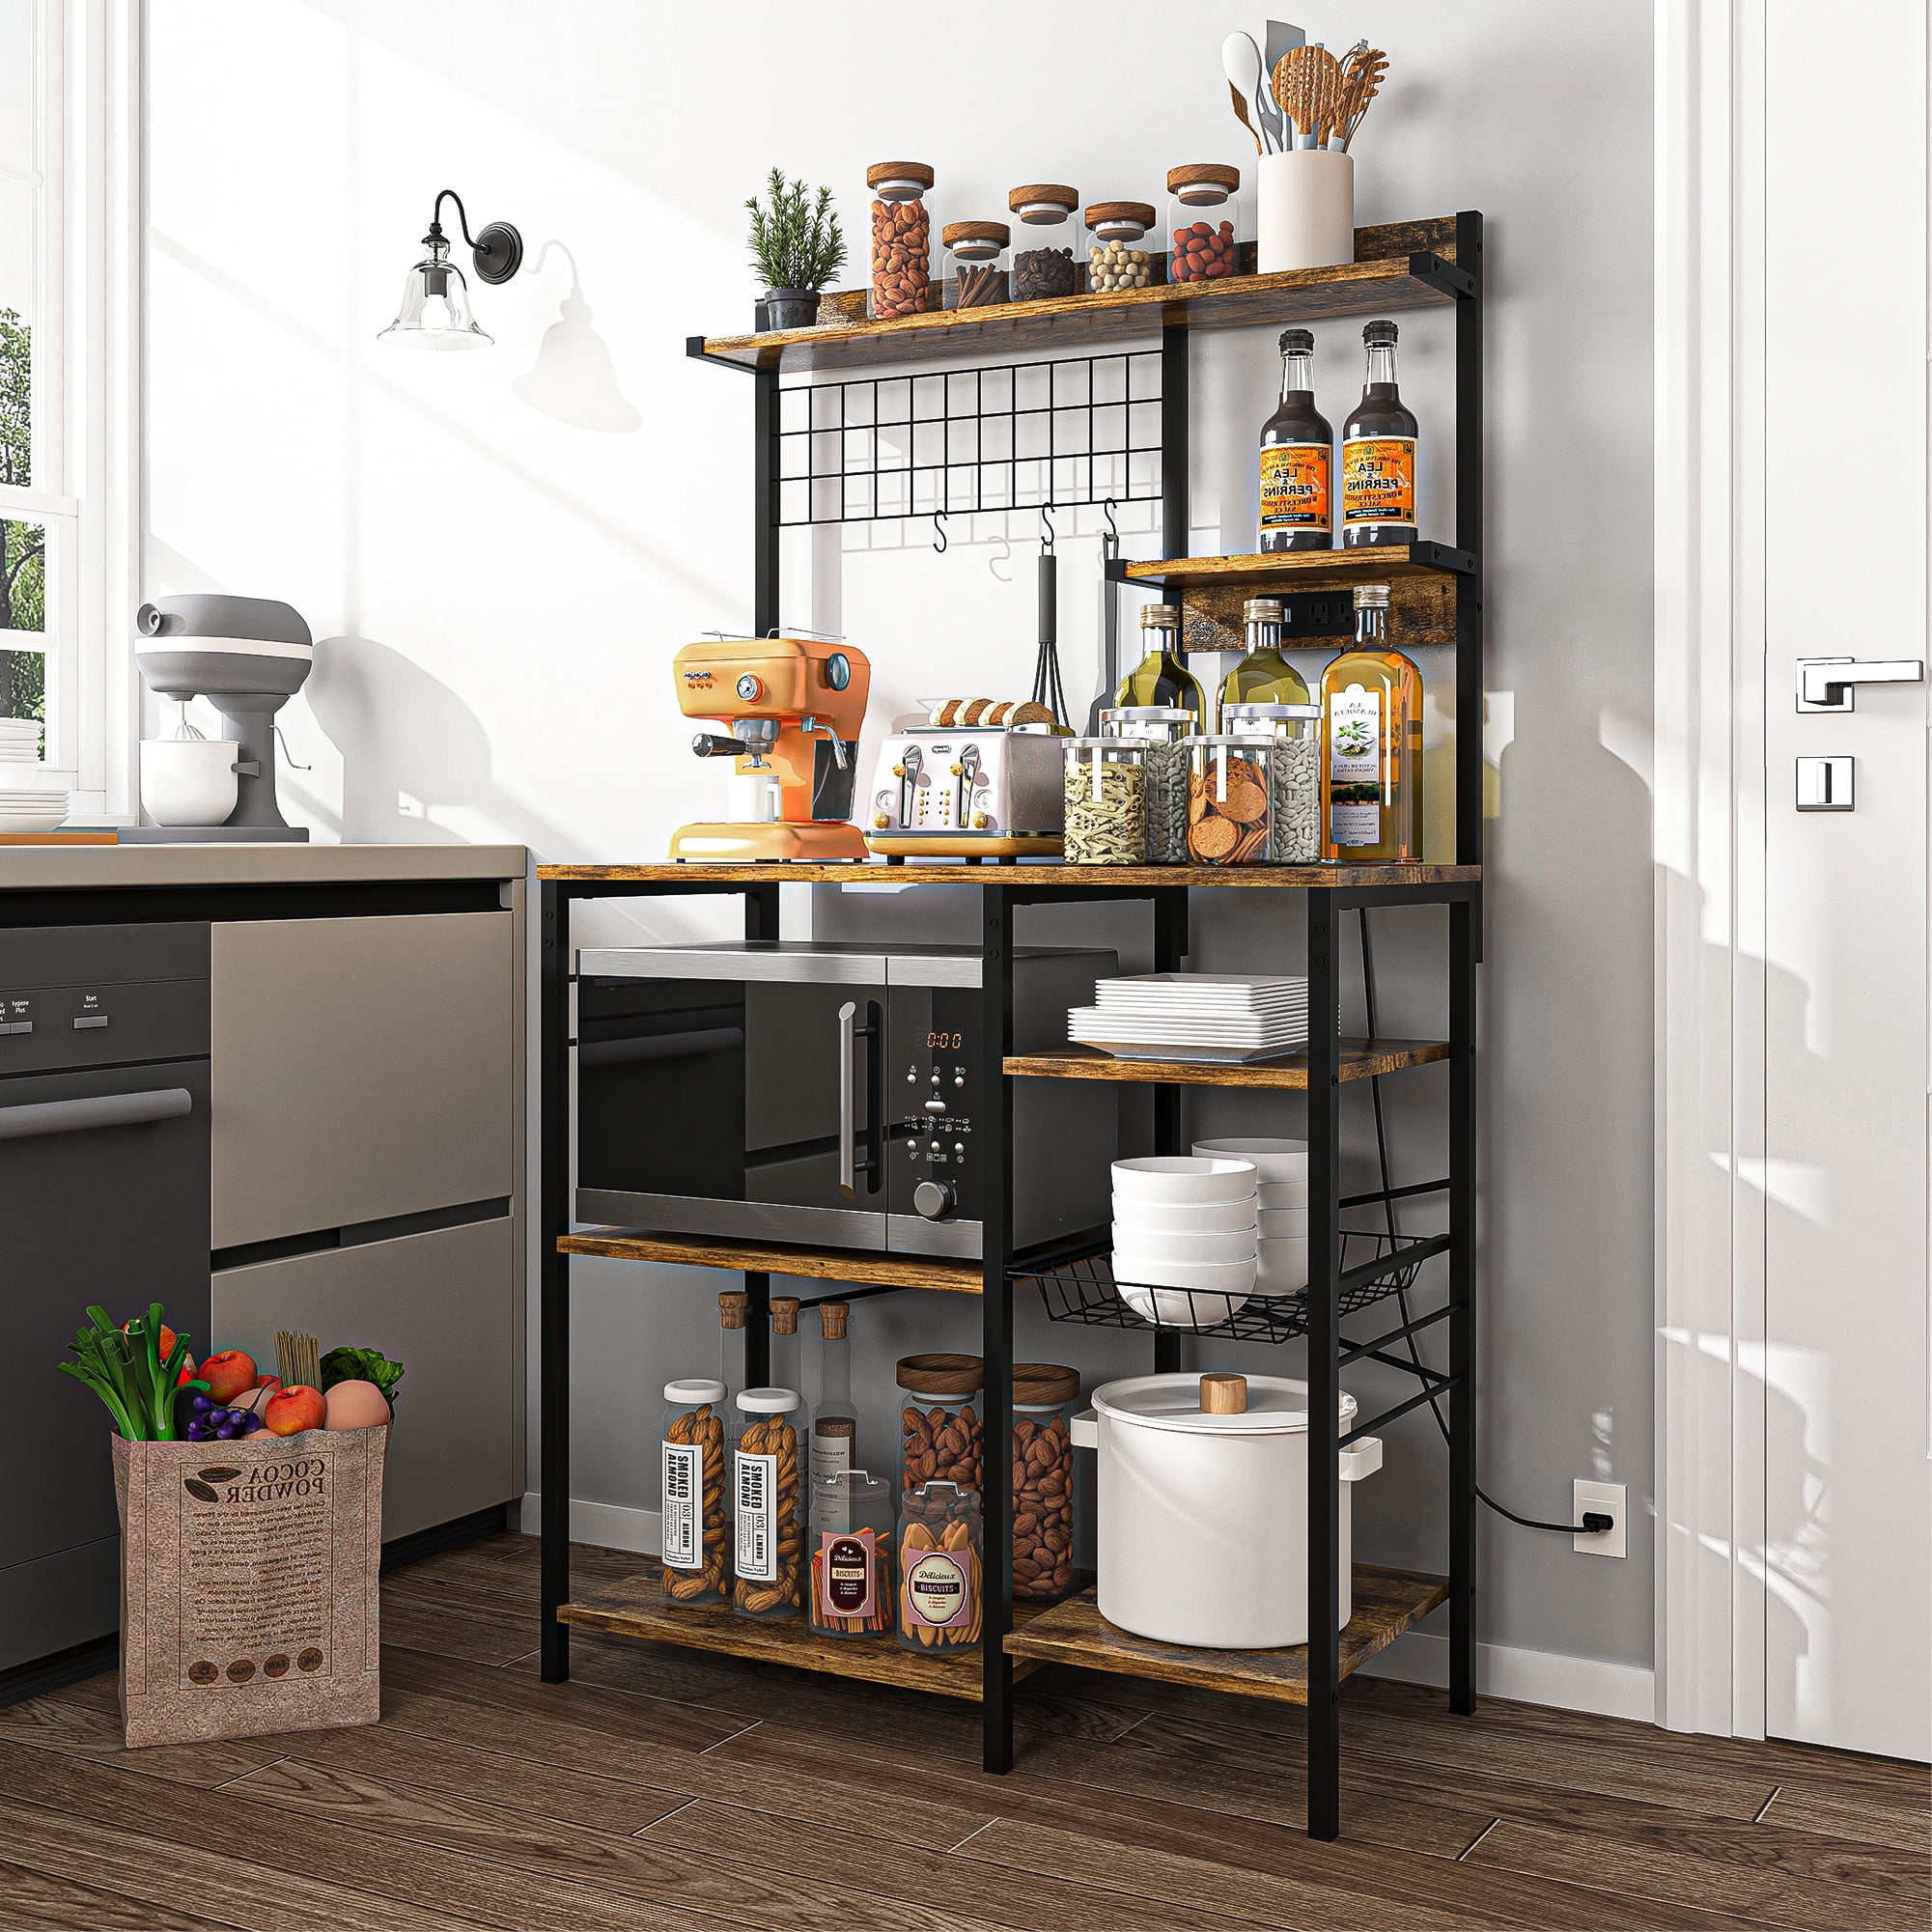 Hommoo Multipurpose Kitchen Storage Rack Kitchen Baker S Rack With Power Outlet Storage Microwave Stand Coffee Bar Station Rustic Brown 88b72941 A18e 46a2 8458 F349802e4937.c9636981b2640a7087e5fa70e781284c 